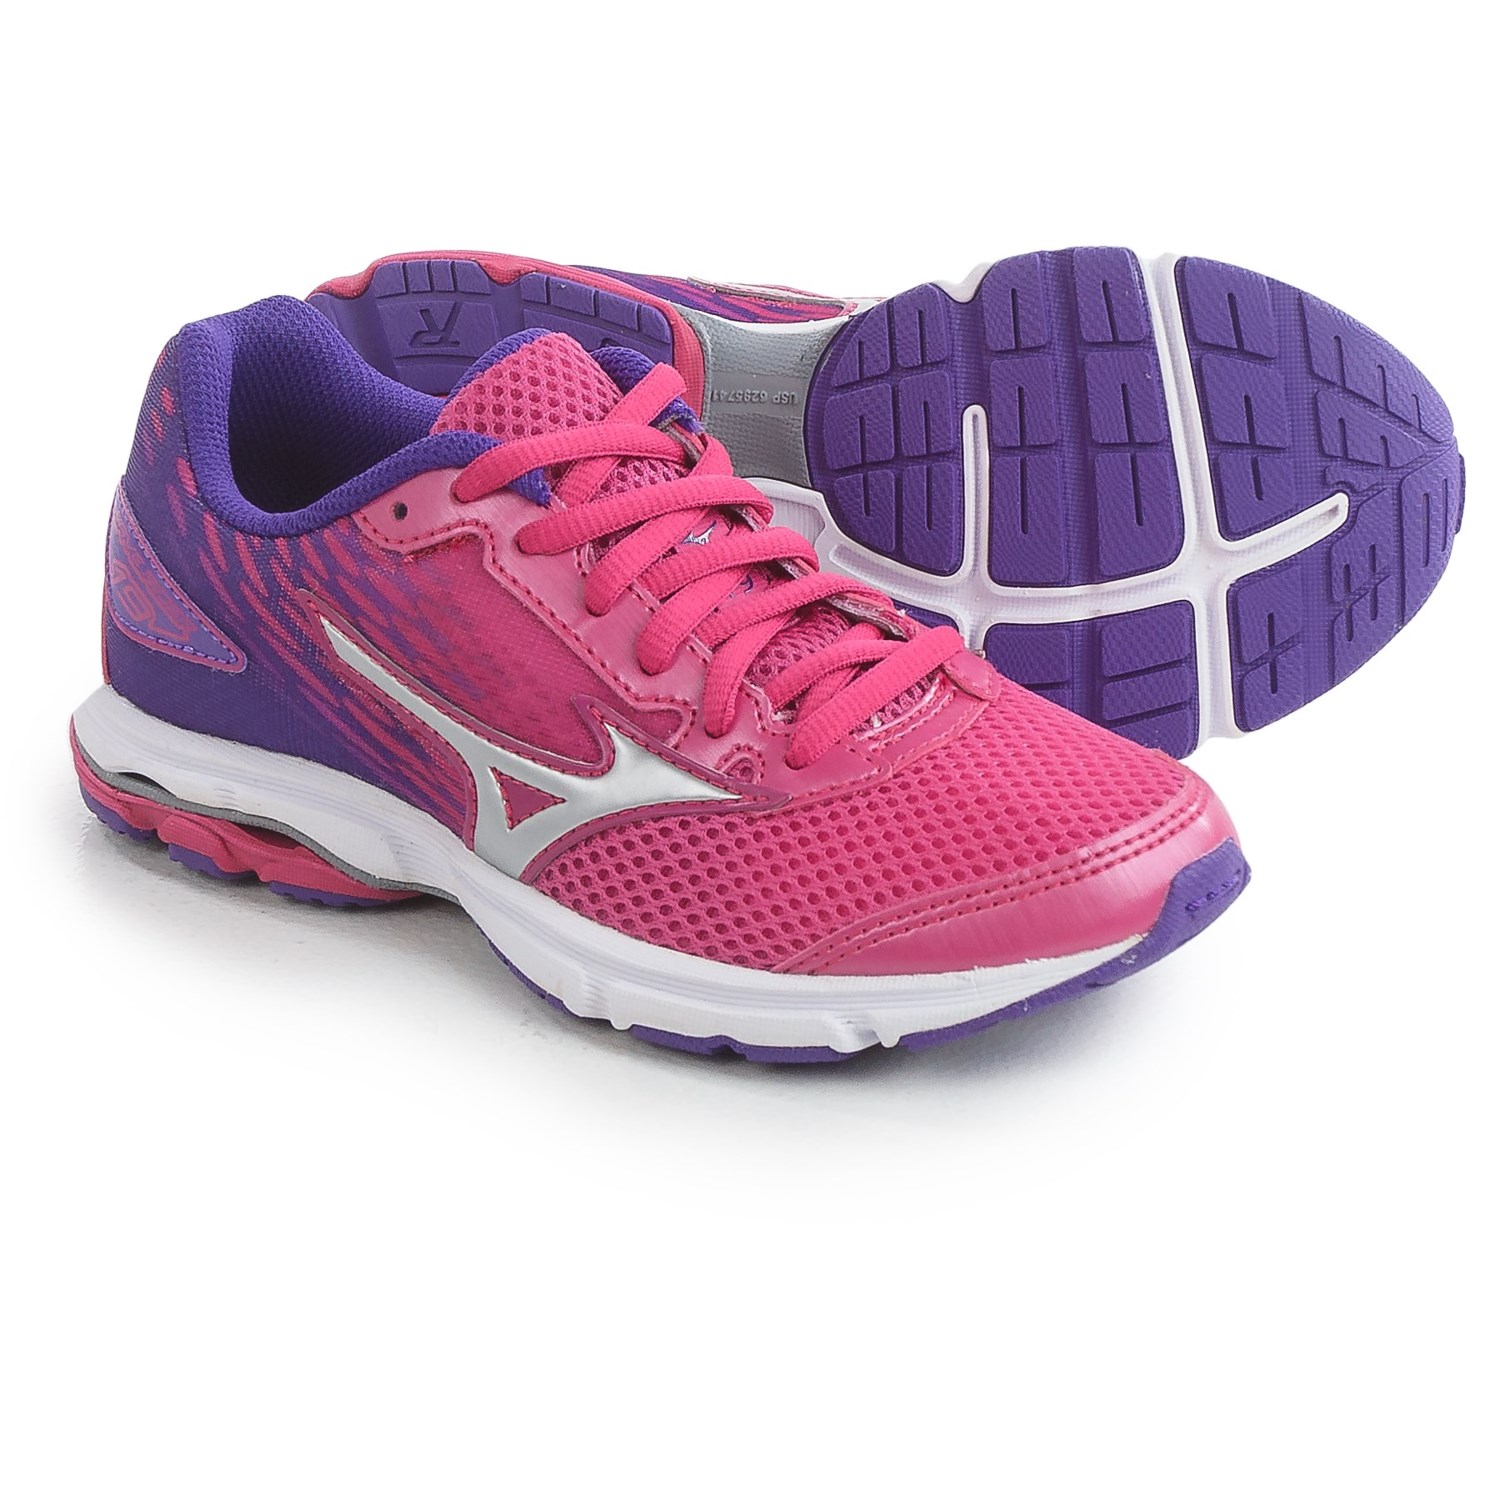 Mizuno Wave Rider 19 Running Shoes (For Little and Big Kids) - Save 64%